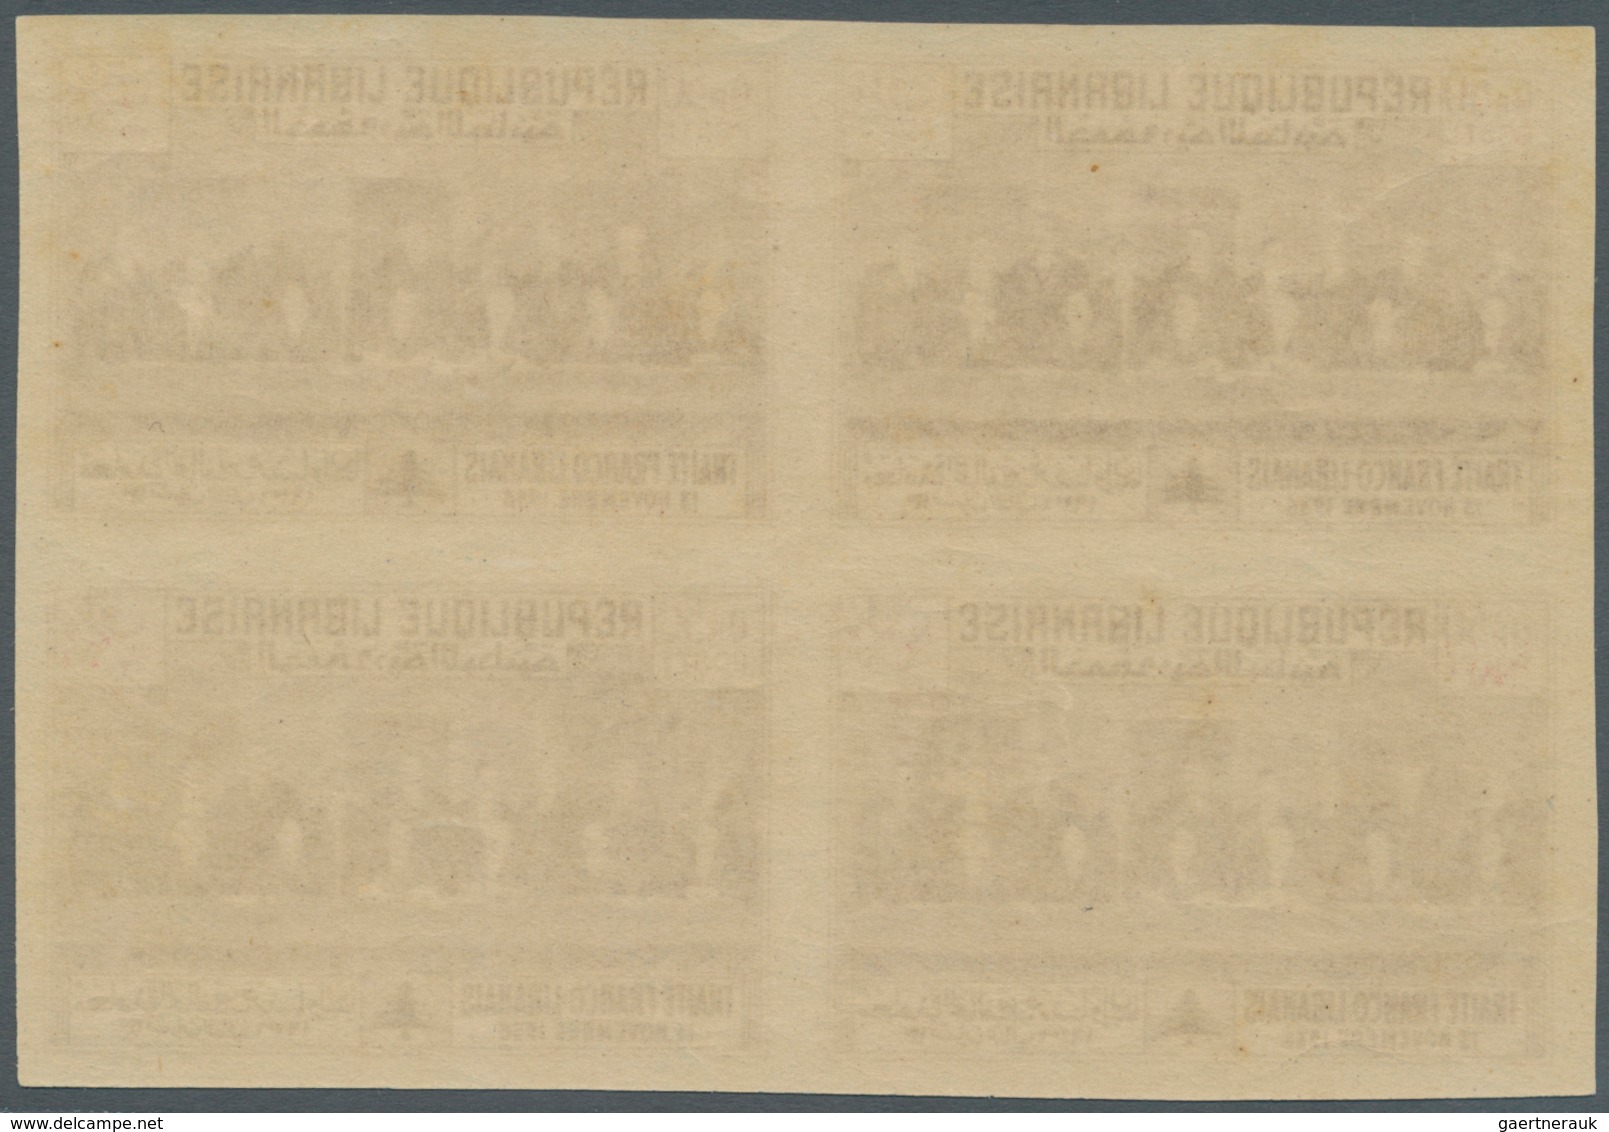 Libanon: 1936, Franco-Lebanese Treaty, not issued, complete set of five values as IMPERFORATE blocks